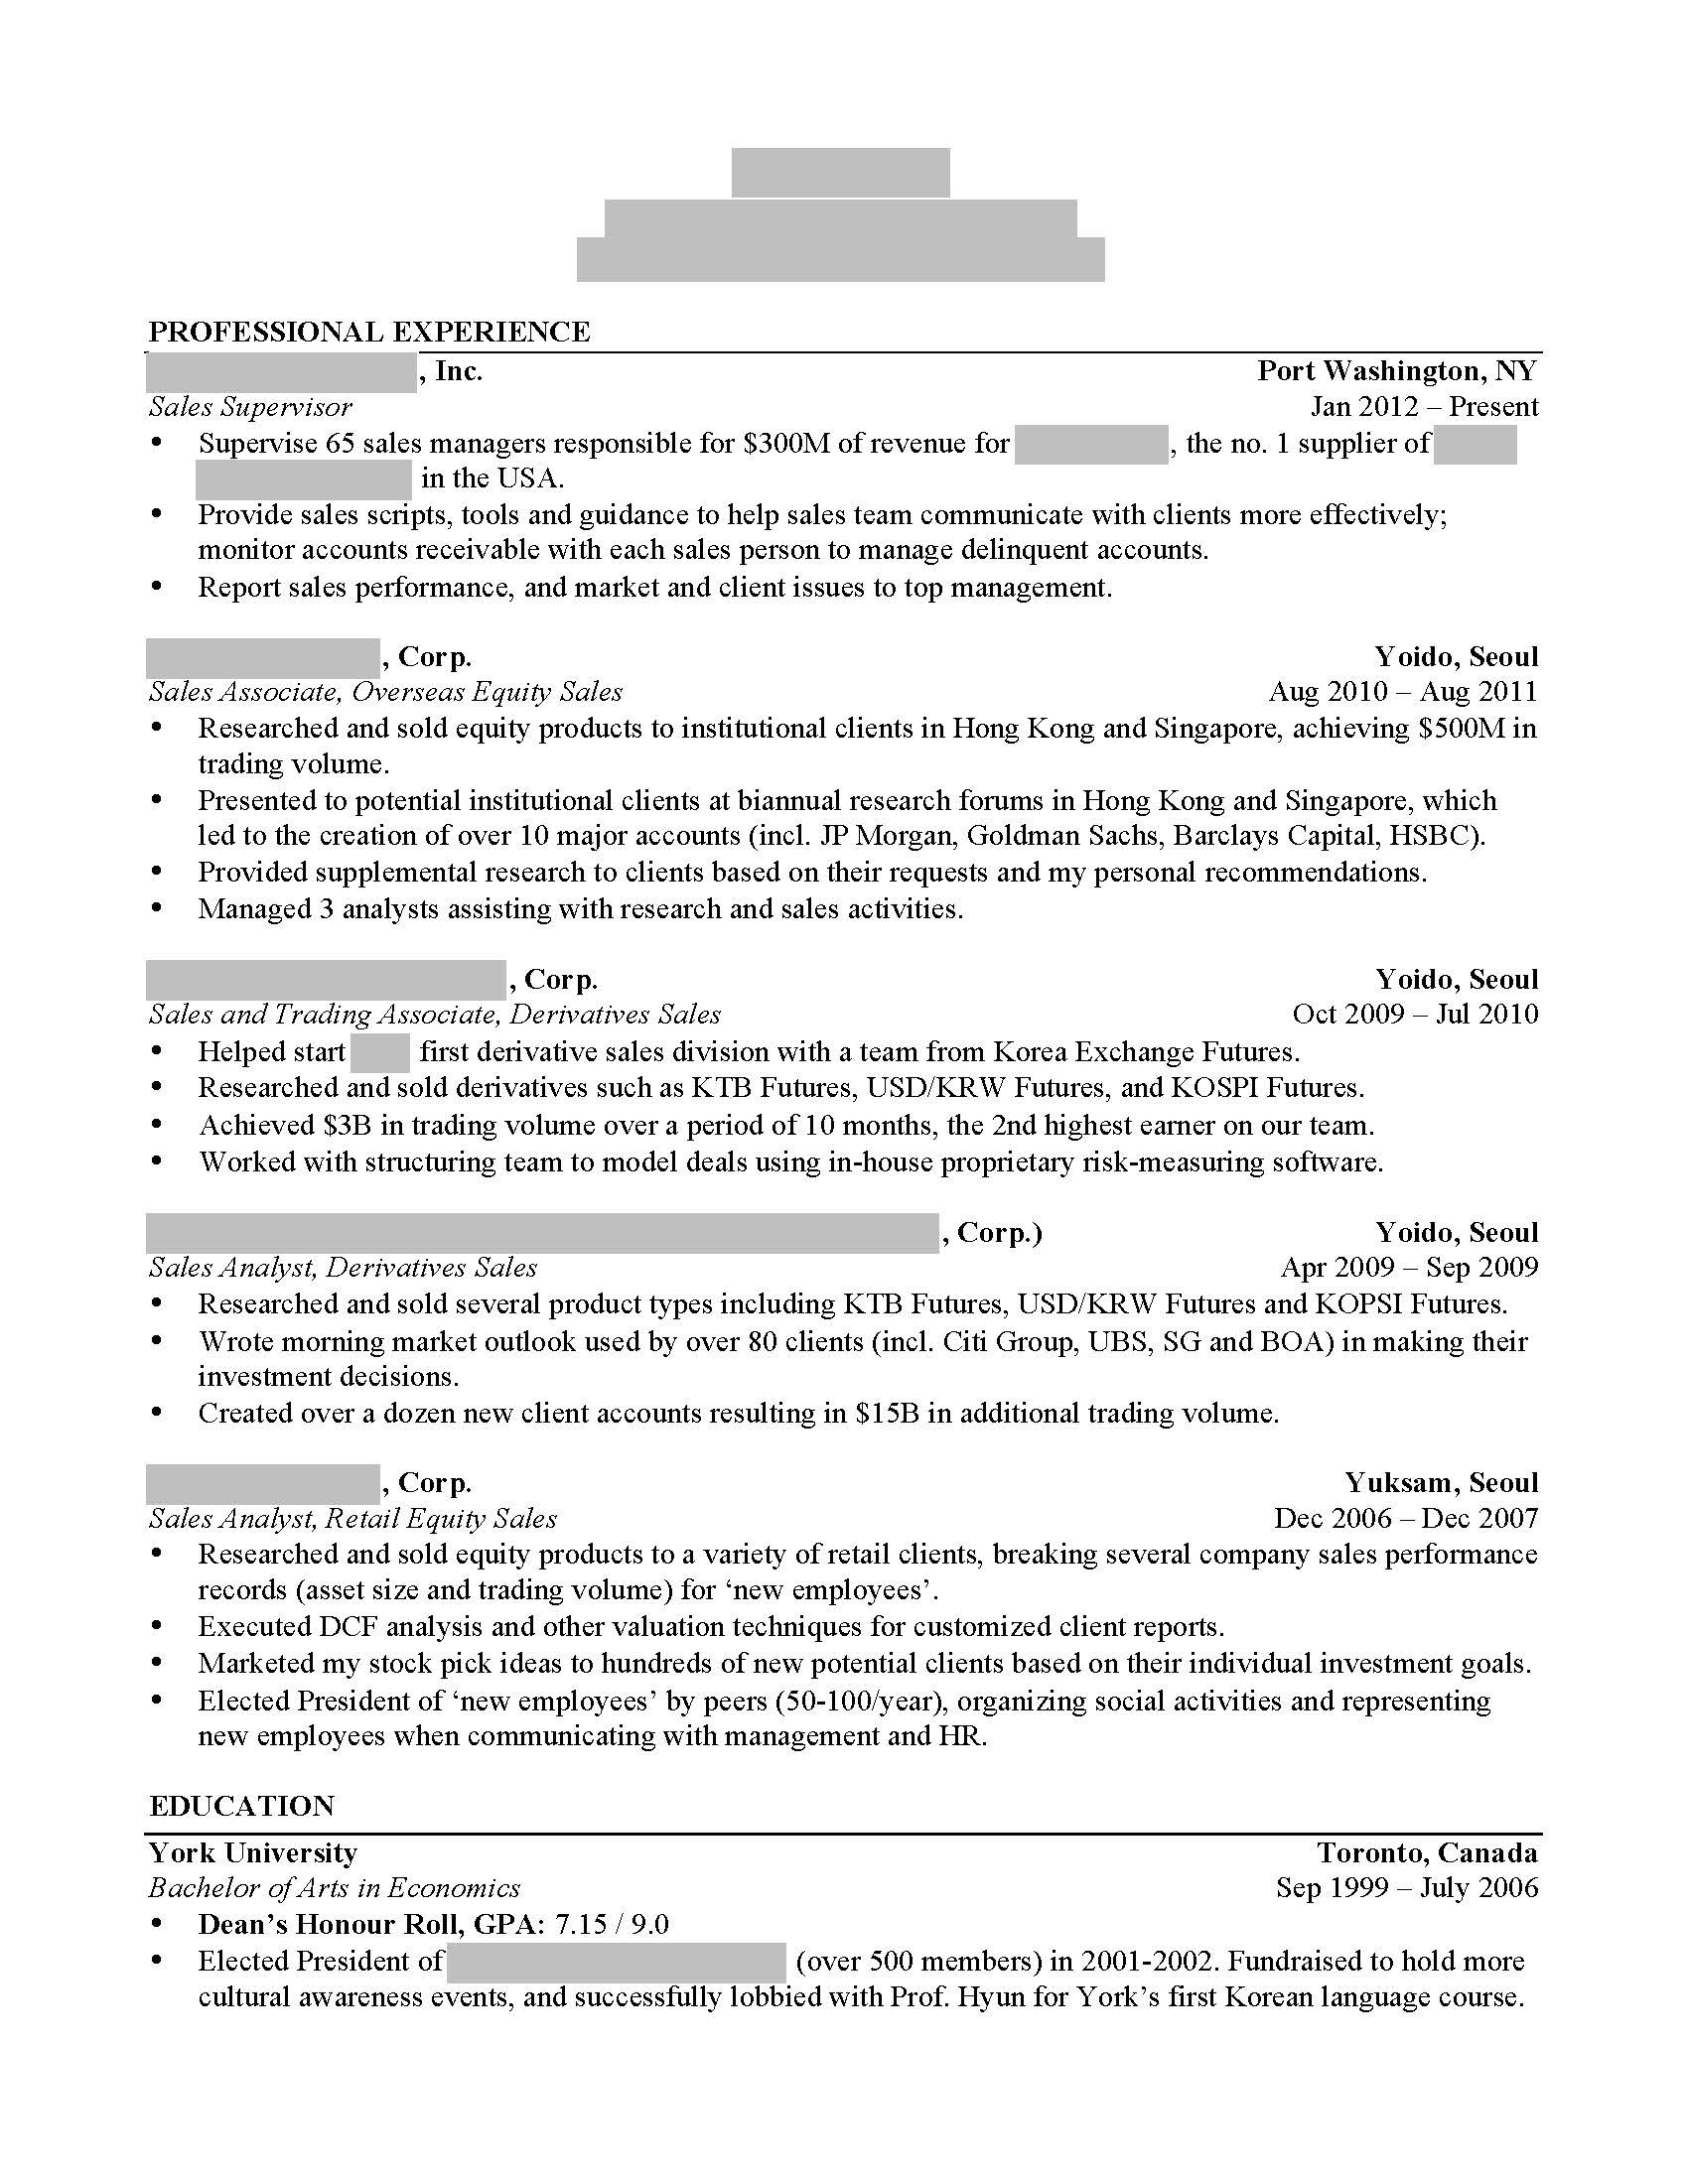 Uw Foster School Of Business Resume Template Resume Tips Archives – Â» touch Mba